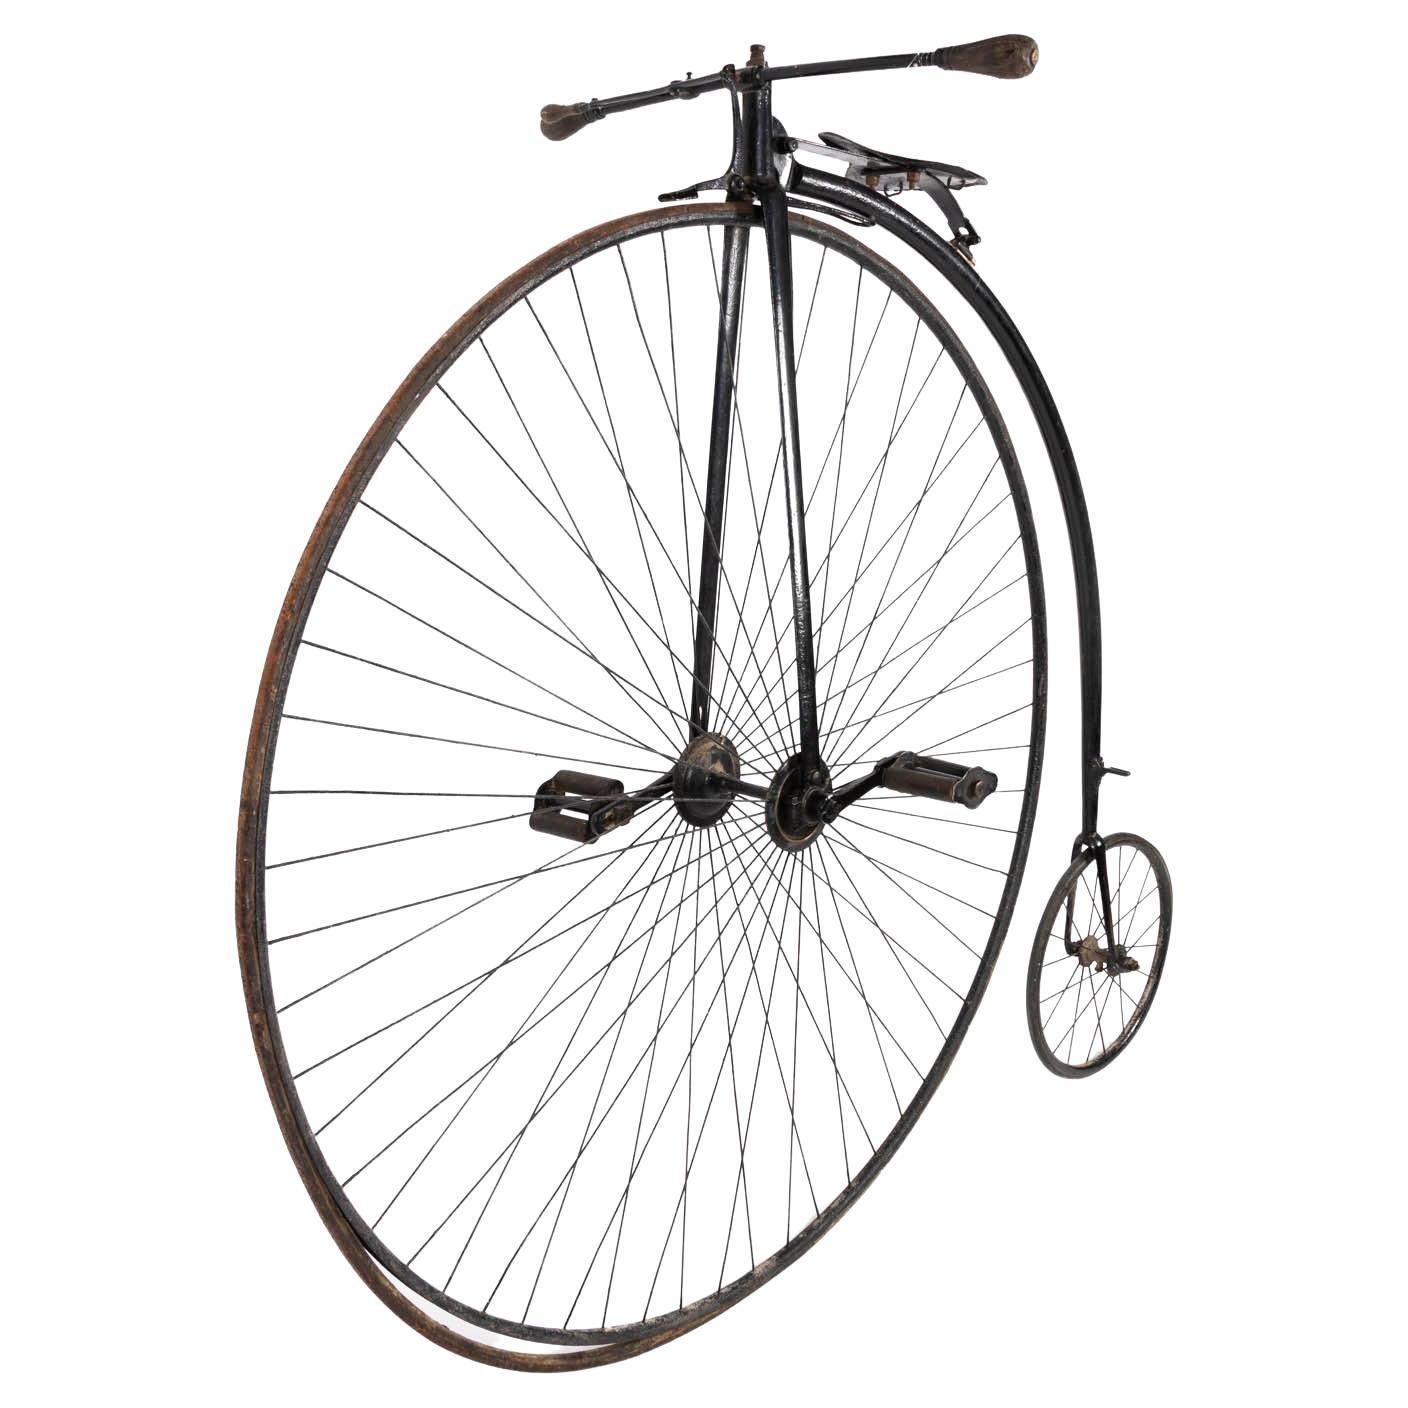 A Special Clyde by S. Griffith’s & Sons of Wolverhampton, Circa 1880.

Frame marked with makers name and model type.

With display stand.

Diameter of front wheel: 50 inch. Diameter of back wheel: 16 inches.
 

S. Griffiths and Sons, Clyde